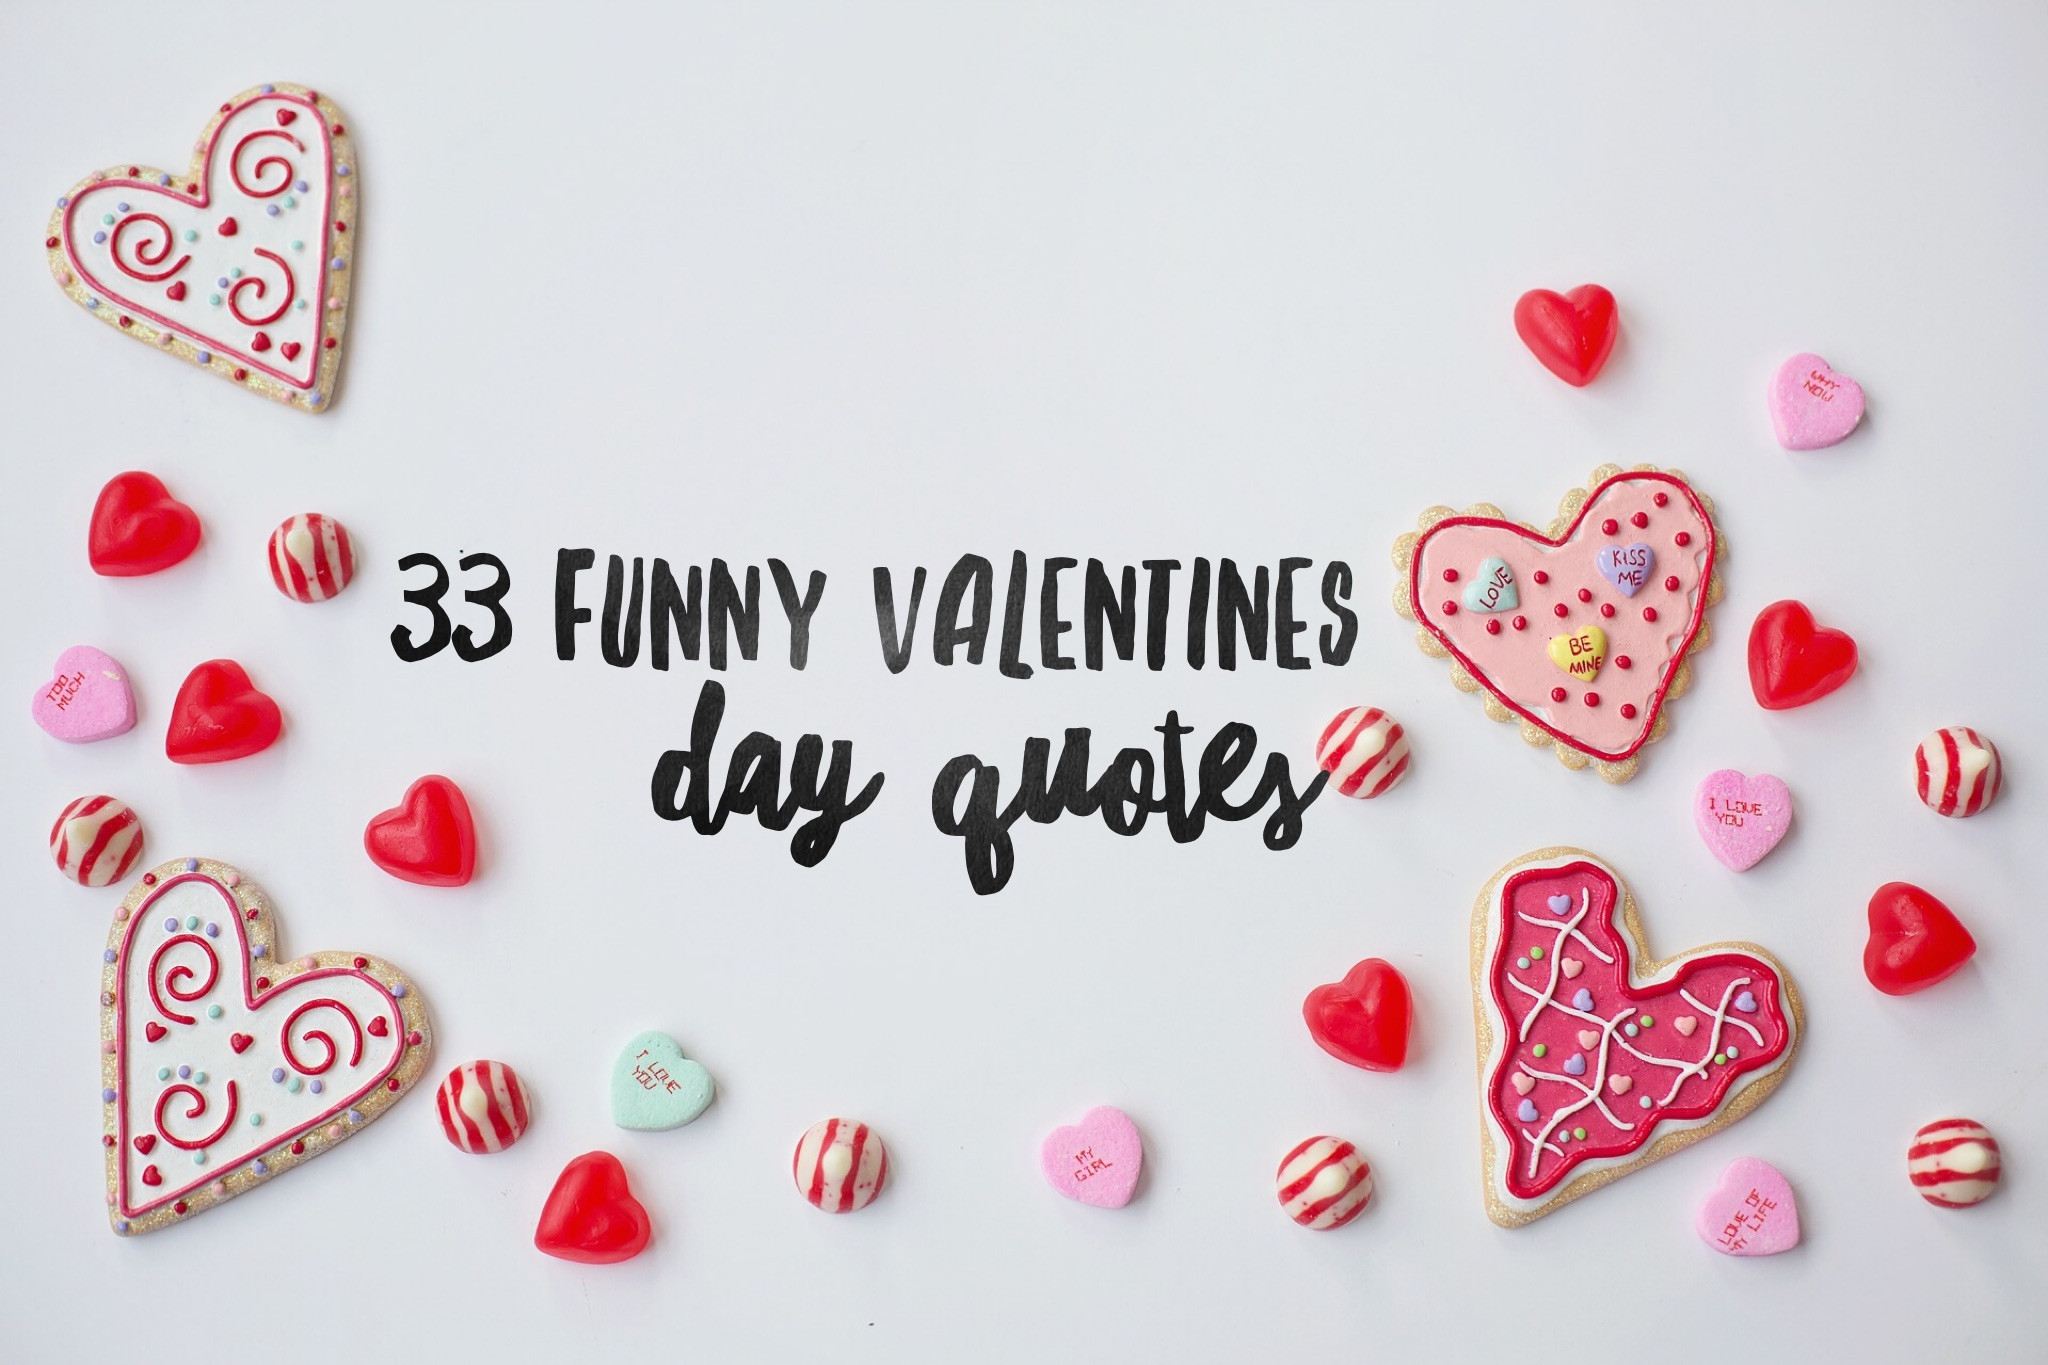 Valentines Day Love Quotes
 33 Funny Valentines Day Quotes